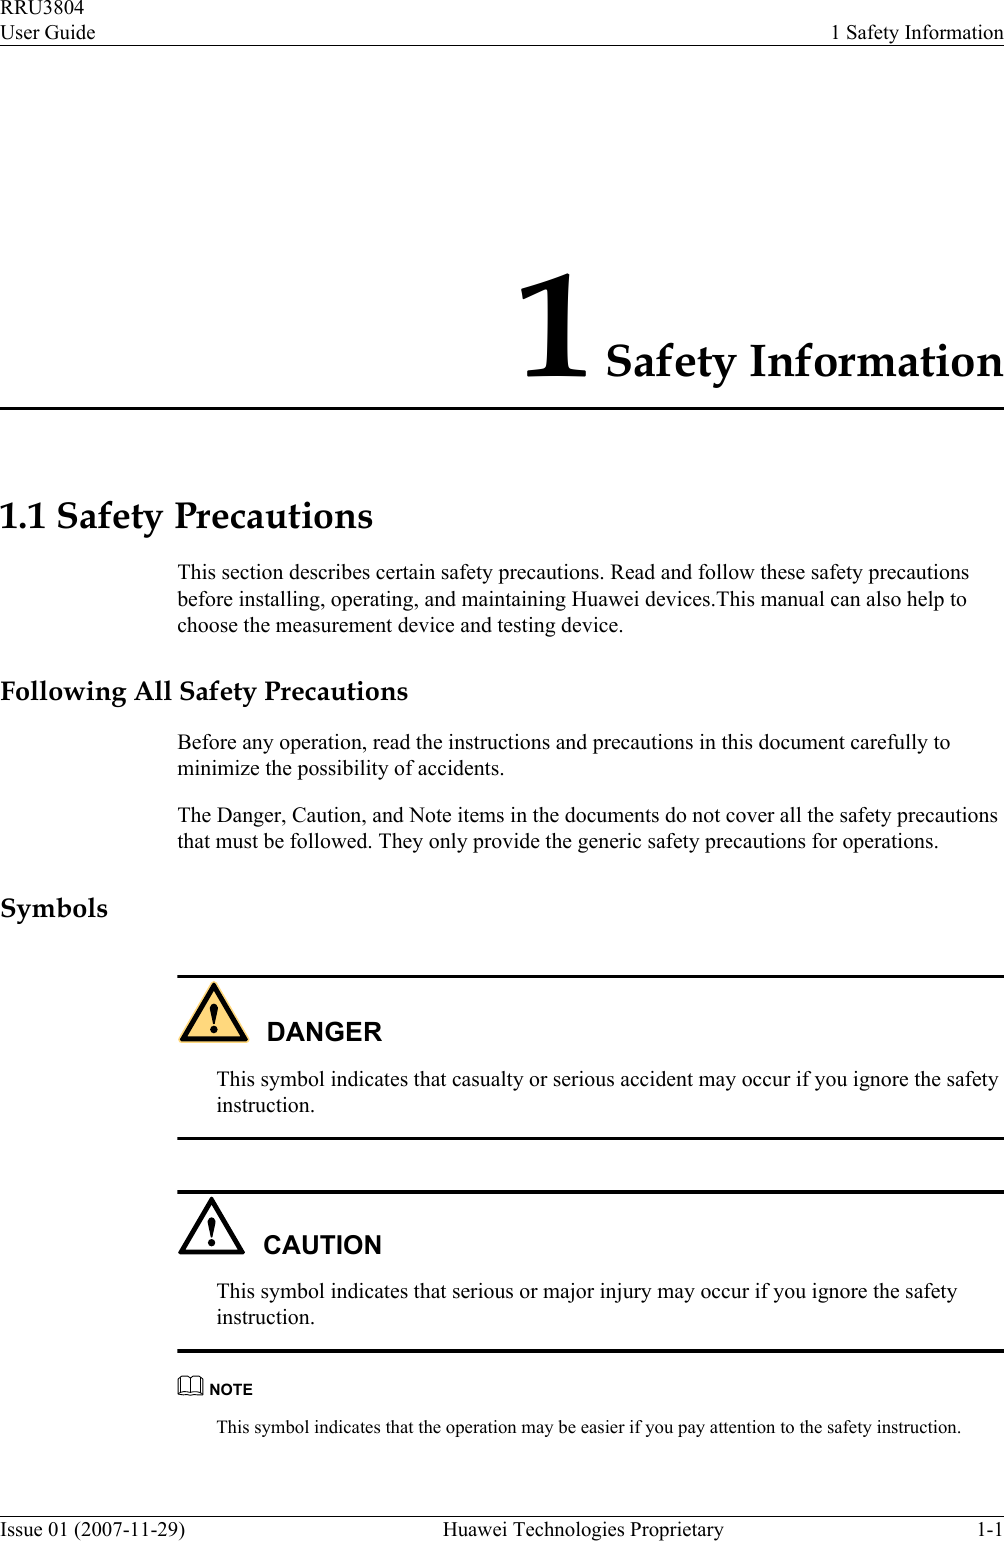 1 Safety Information1.1 Safety PrecautionsThis section describes certain safety precautions. Read and follow these safety precautionsbefore installing, operating, and maintaining Huawei devices.This manual can also help tochoose the measurement device and testing device.Following All Safety PrecautionsBefore any operation, read the instructions and precautions in this document carefully tominimize the possibility of accidents.The Danger, Caution, and Note items in the documents do not cover all the safety precautionsthat must be followed. They only provide the generic safety precautions for operations.SymbolsDANGERThis symbol indicates that casualty or serious accident may occur if you ignore the safetyinstruction.CAUTIONThis symbol indicates that serious or major injury may occur if you ignore the safetyinstruction.NOTEThis symbol indicates that the operation may be easier if you pay attention to the safety instruction.RRU3804User Guide 1 Safety InformationIssue 01 (2007-11-29)  Huawei Technologies Proprietary 1-1